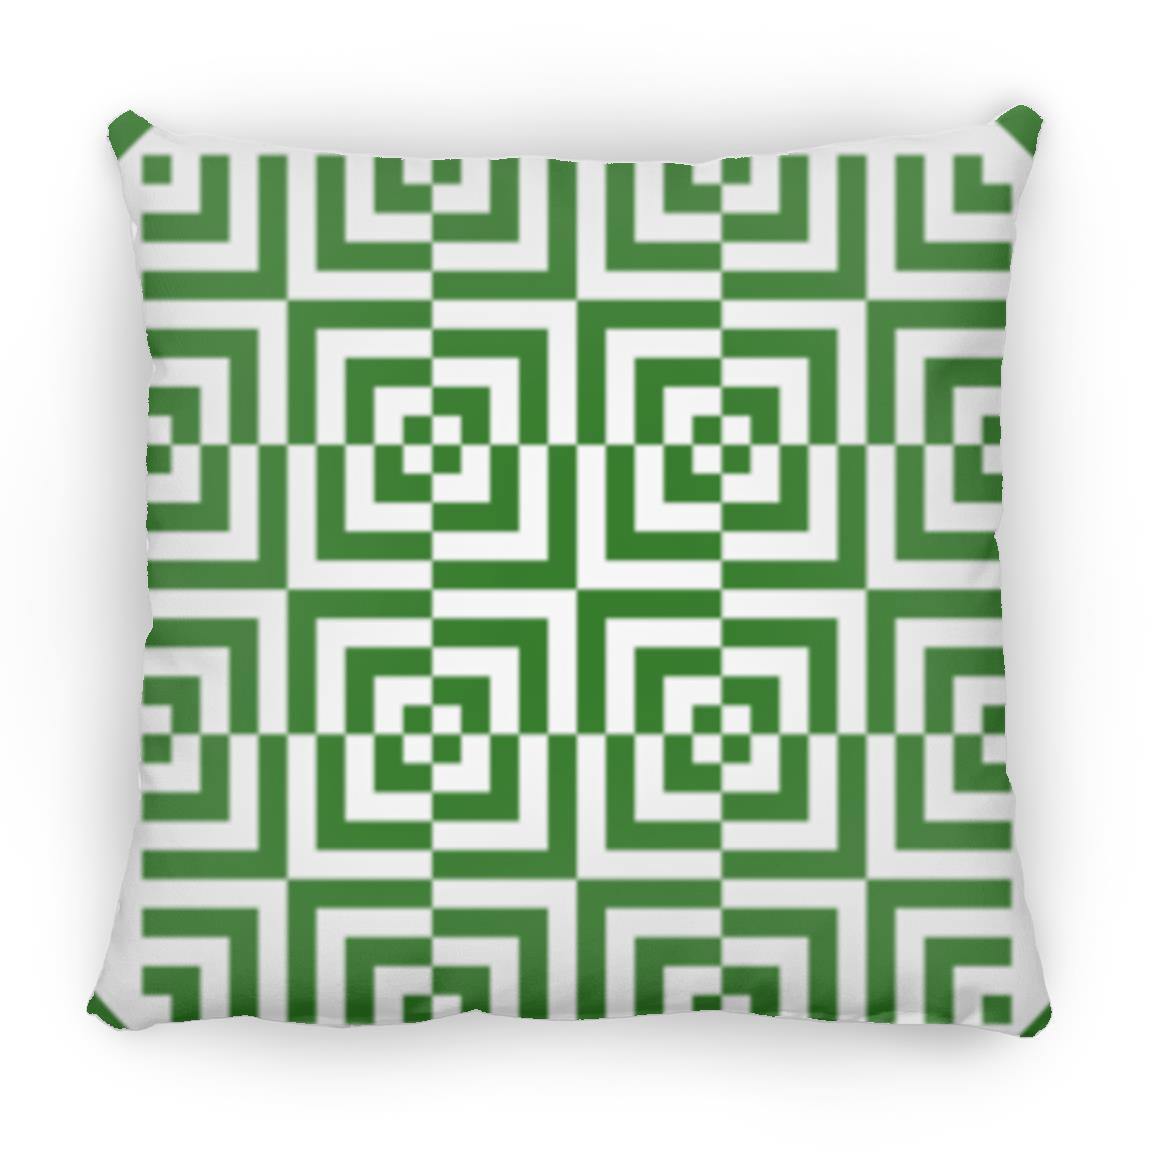 Crop Circle Pillow - Savernake Forest - Shapes of Wisdom